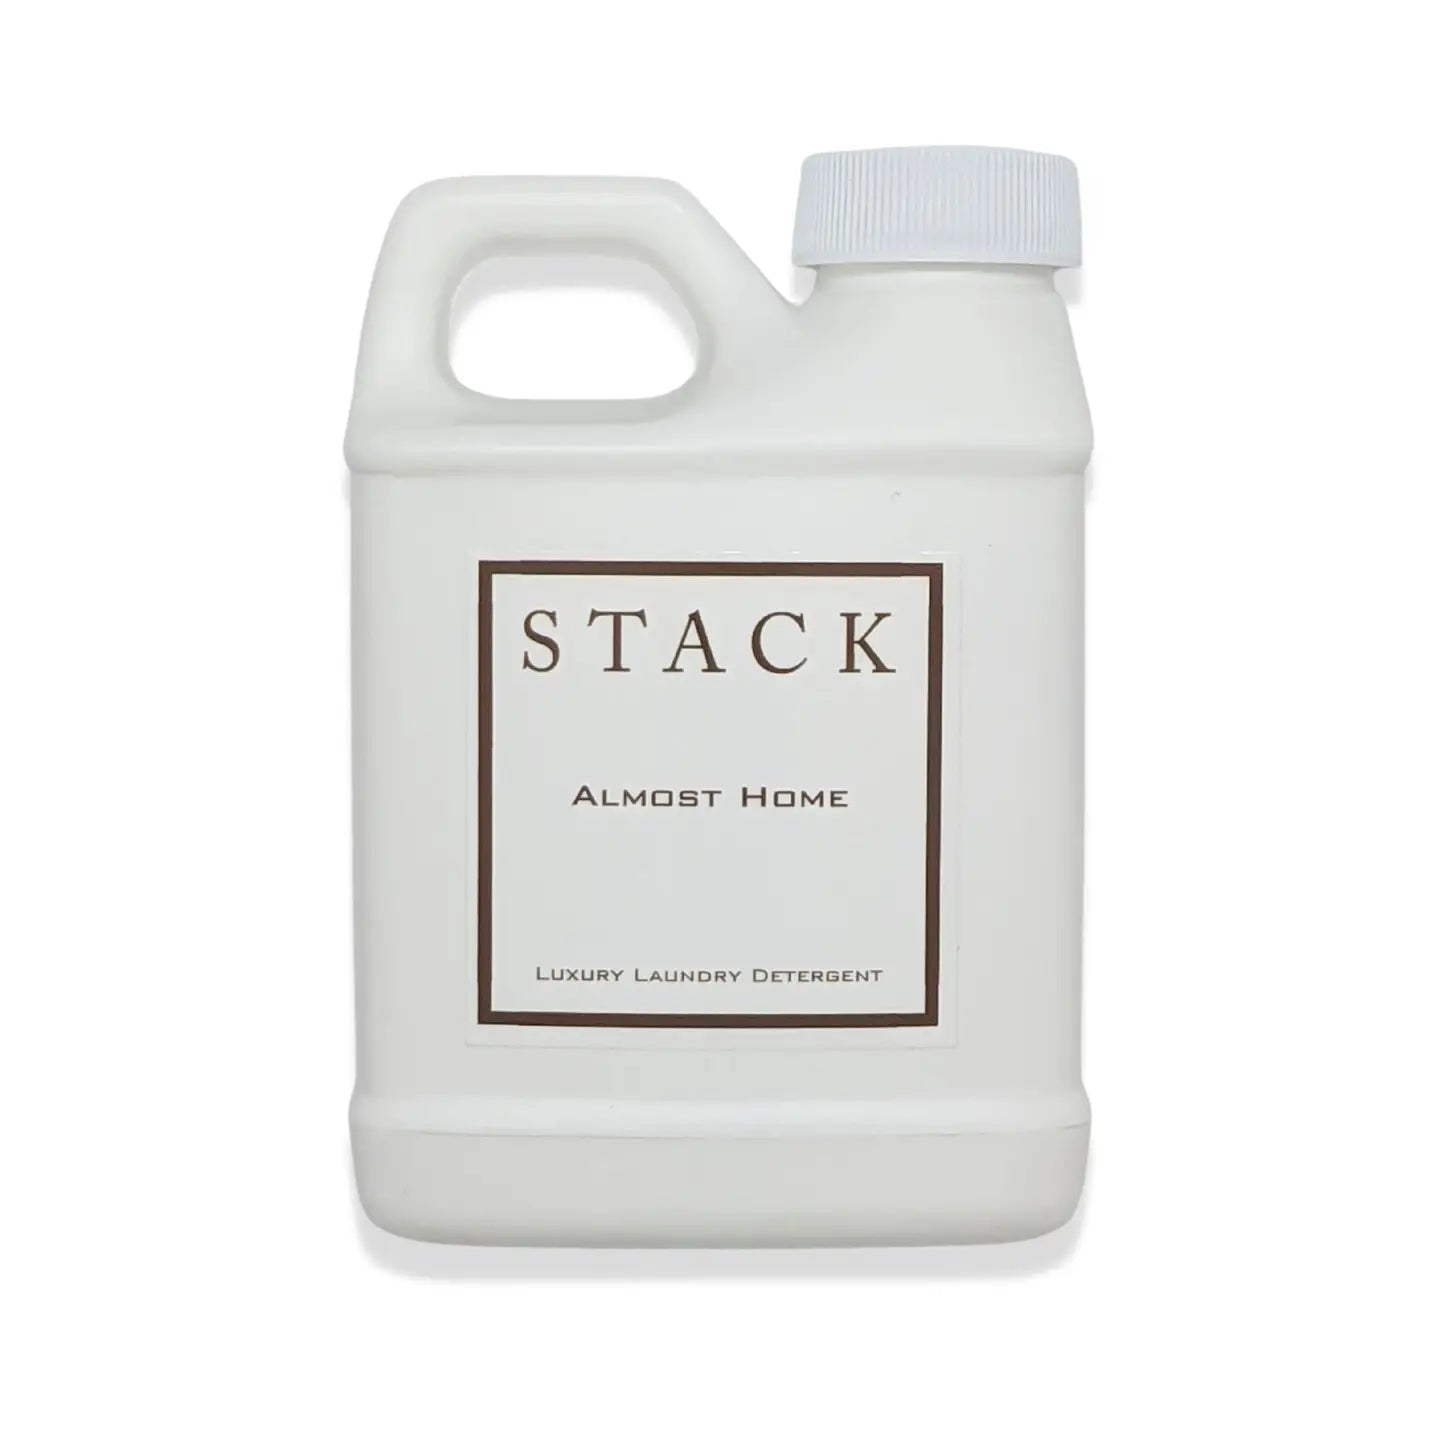 The Stack 16oz. Laundry Detergent